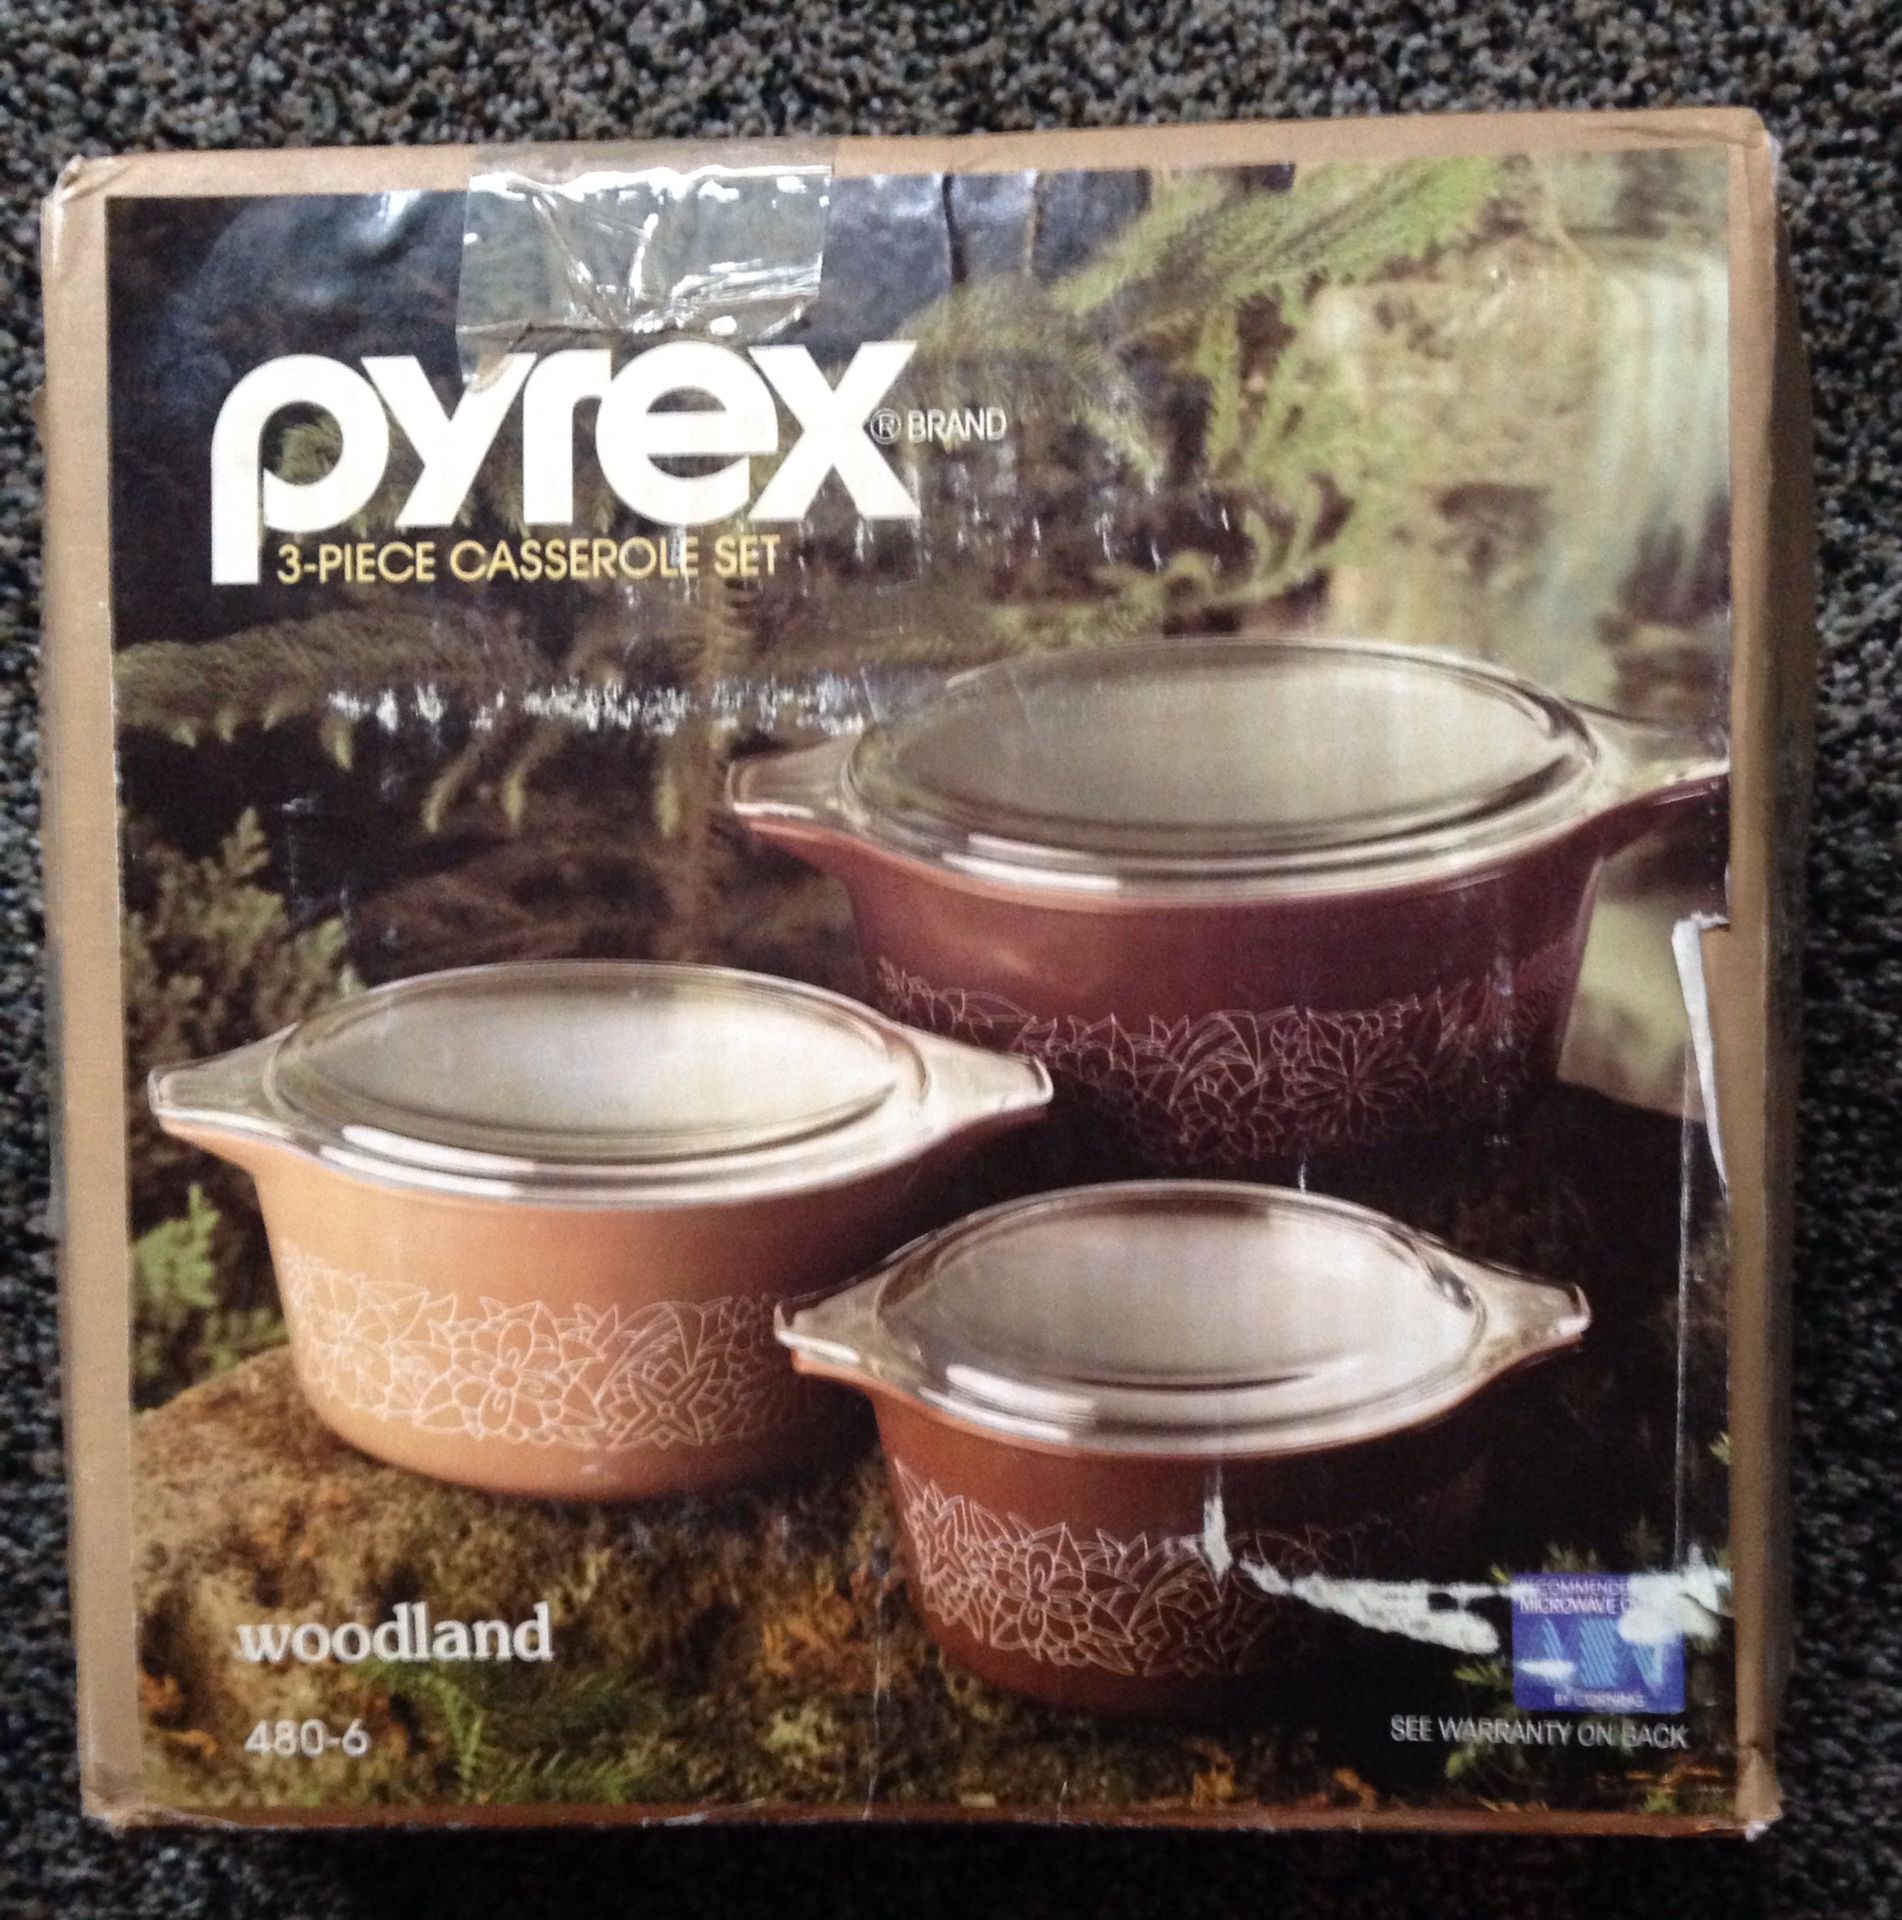 Pyrex 3 Bowls and Lids Never Used!